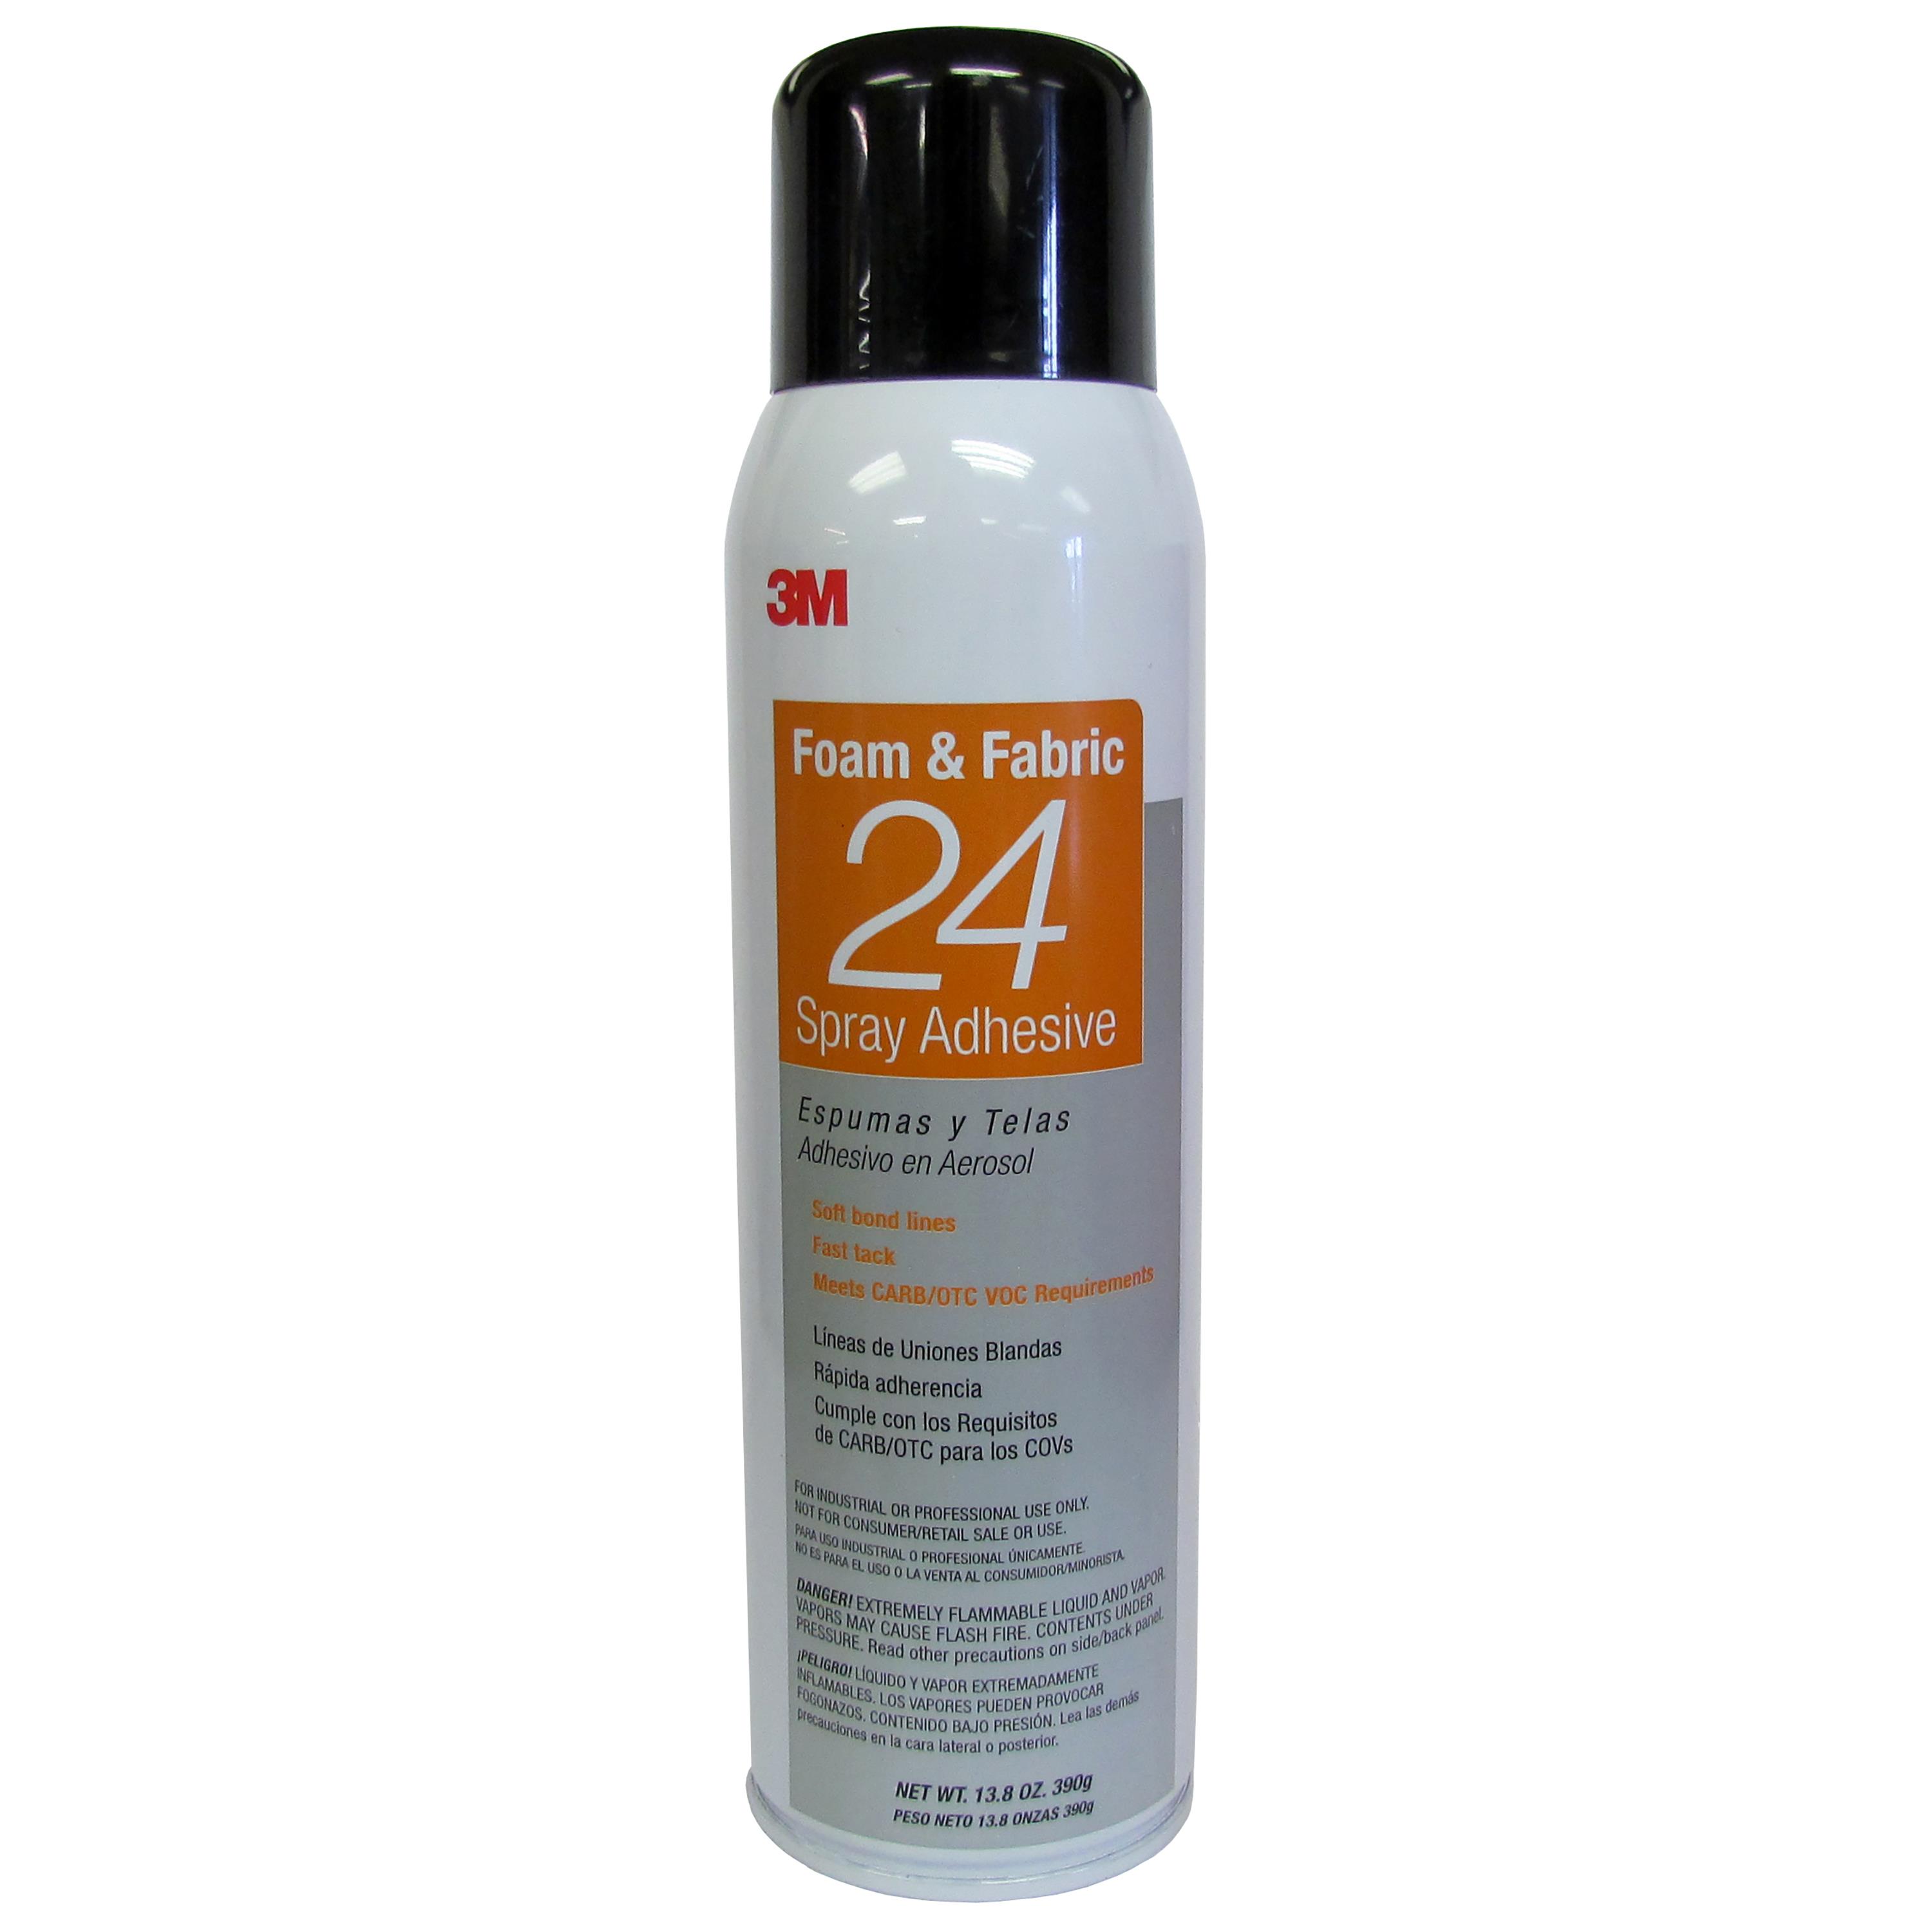 Larsen Lights, LED lights for your equipment !. 3M Foam & Fabric 24 Spray  Adhesive, (15 oz. Can)